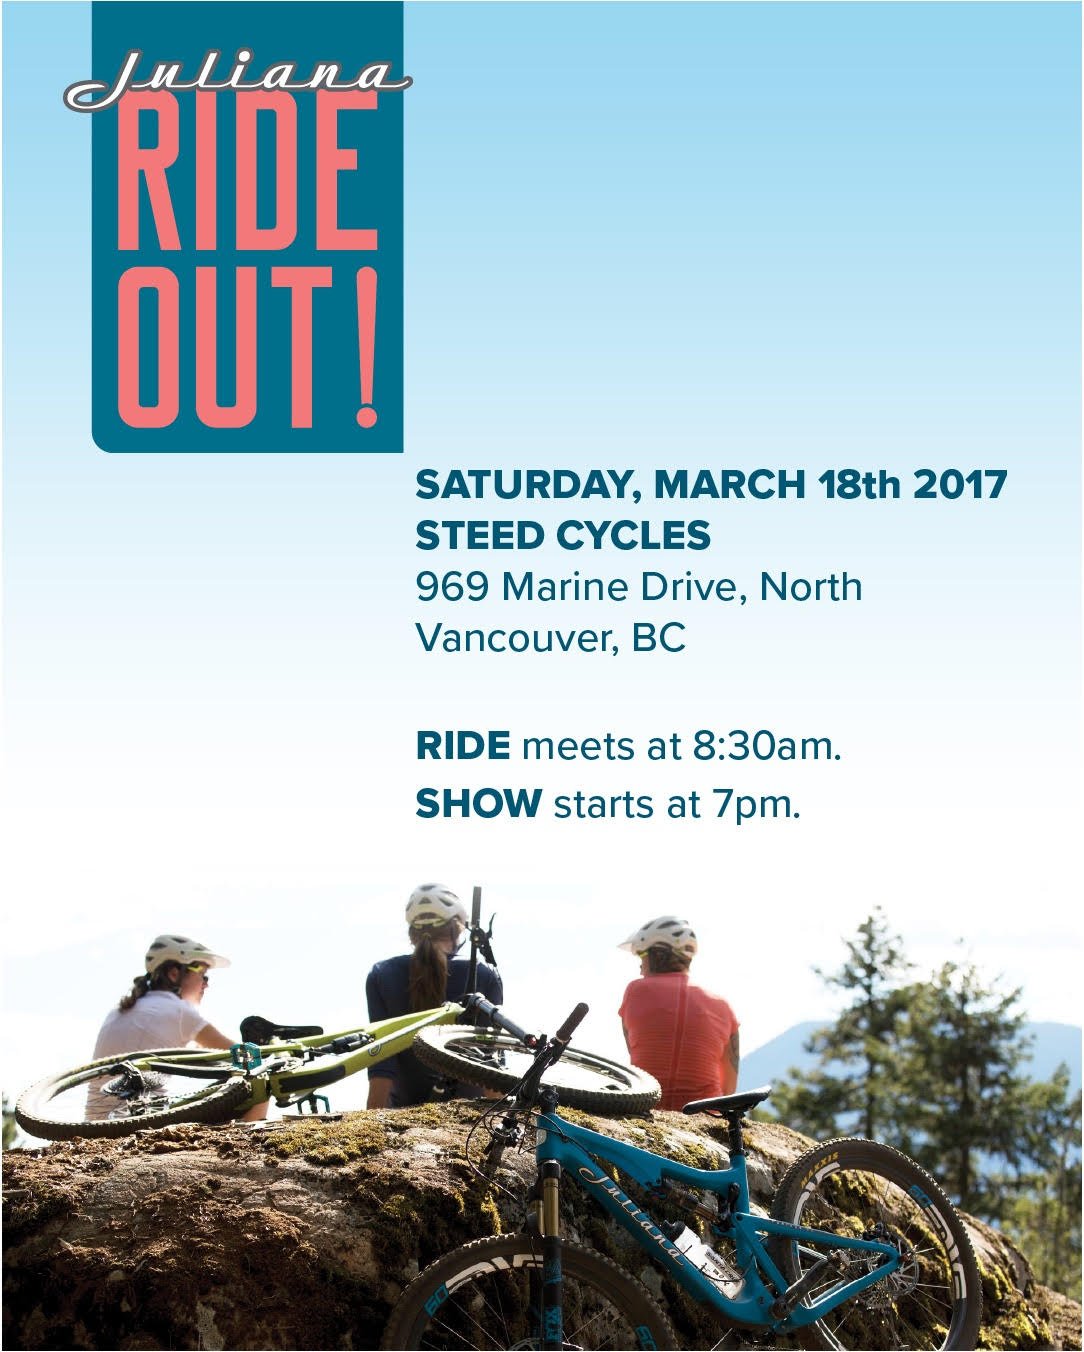 Juliana Ride-Out Poster